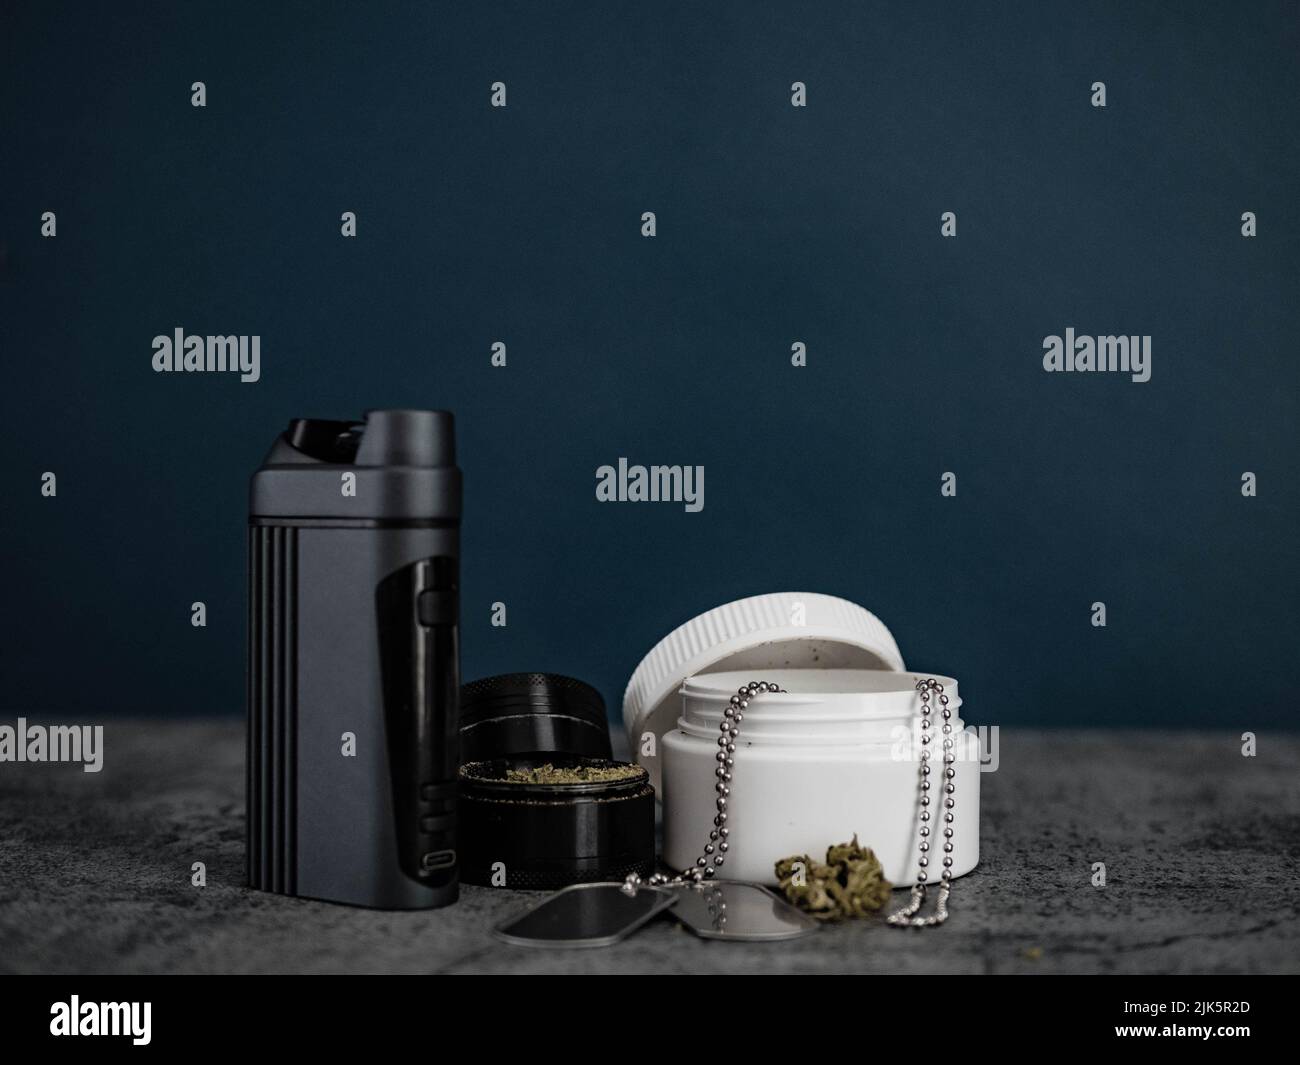 Lifestyle medical cannabis images, Cannabis users include sufferers of PTSD and chronic pain. Dry herb Vaping is the future for cannabis. Stock Photo